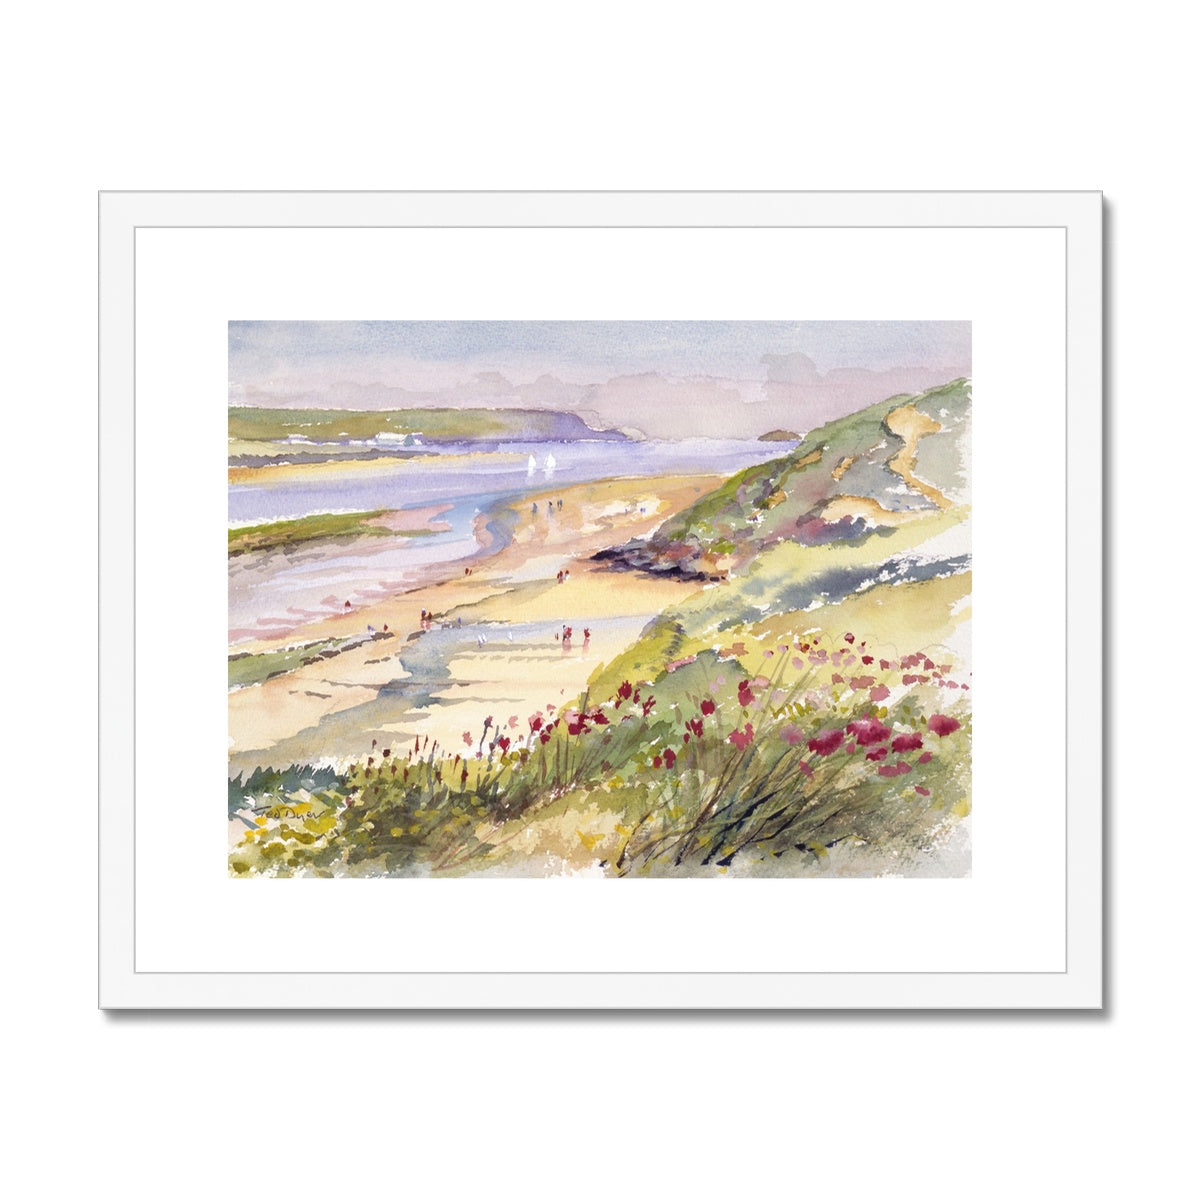 Ted Dyer Framed Open Edition Cornish Fine Art Print. 'View of the Camel Estuary and Dayer Bay from Rock'. Cornwall Art Gallery